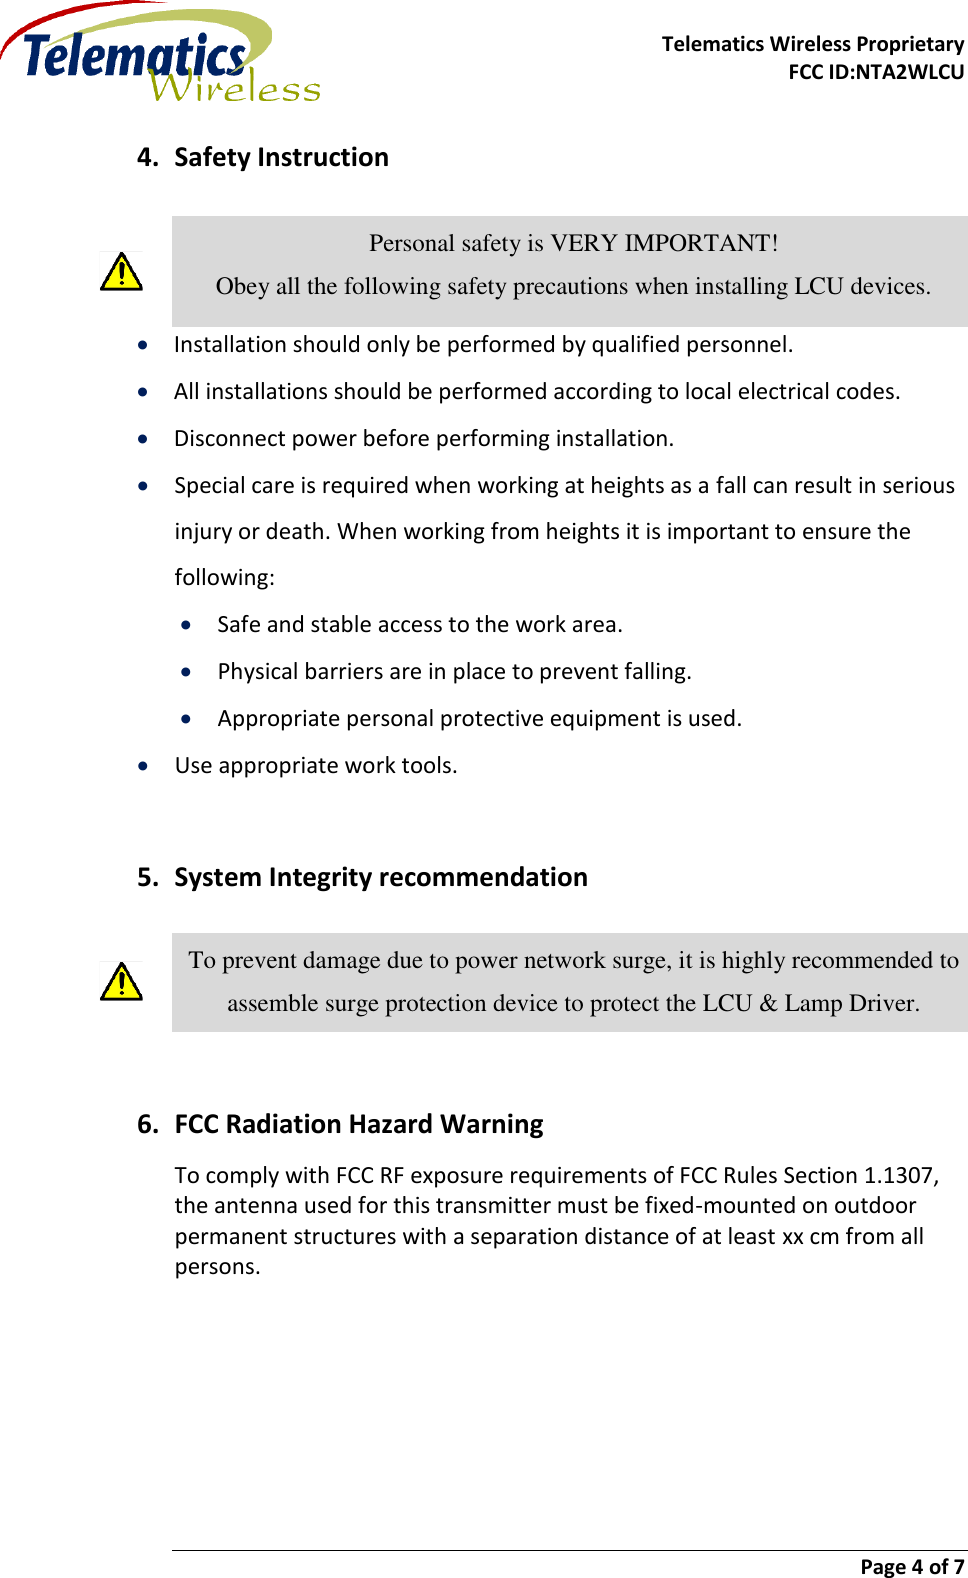     Telematics Wireless Proprietary   FCC ID:NTA2WLCU                        Page 4 of 7   4. Safety Instruction   Personal safety is VERY IMPORTANT! Obey all the following safety precautions when installing LCU devices.  Installation should only be performed by qualified personnel.  All installations should be performed according to local electrical codes.  Disconnect power before performing installation.  Special care is required when working at heights as a fall can result in serious injury or death. When working from heights it is important to ensure the following:  Safe and stable access to the work area.  Physical barriers are in place to prevent falling.  Appropriate personal protective equipment is used.  Use appropriate work tools.  5. System Integrity recommendation  To prevent damage due to power network surge, it is highly recommended to assemble surge protection device to protect the LCU &amp; Lamp Driver.  6. FCC Radiation Hazard Warning To comply with FCC RF exposure requirements of FCC Rules Section 1.1307, the antenna used for this transmitter must be fixed-mounted on outdoor permanent structures with a separation distance of at least xx cm from all persons.   